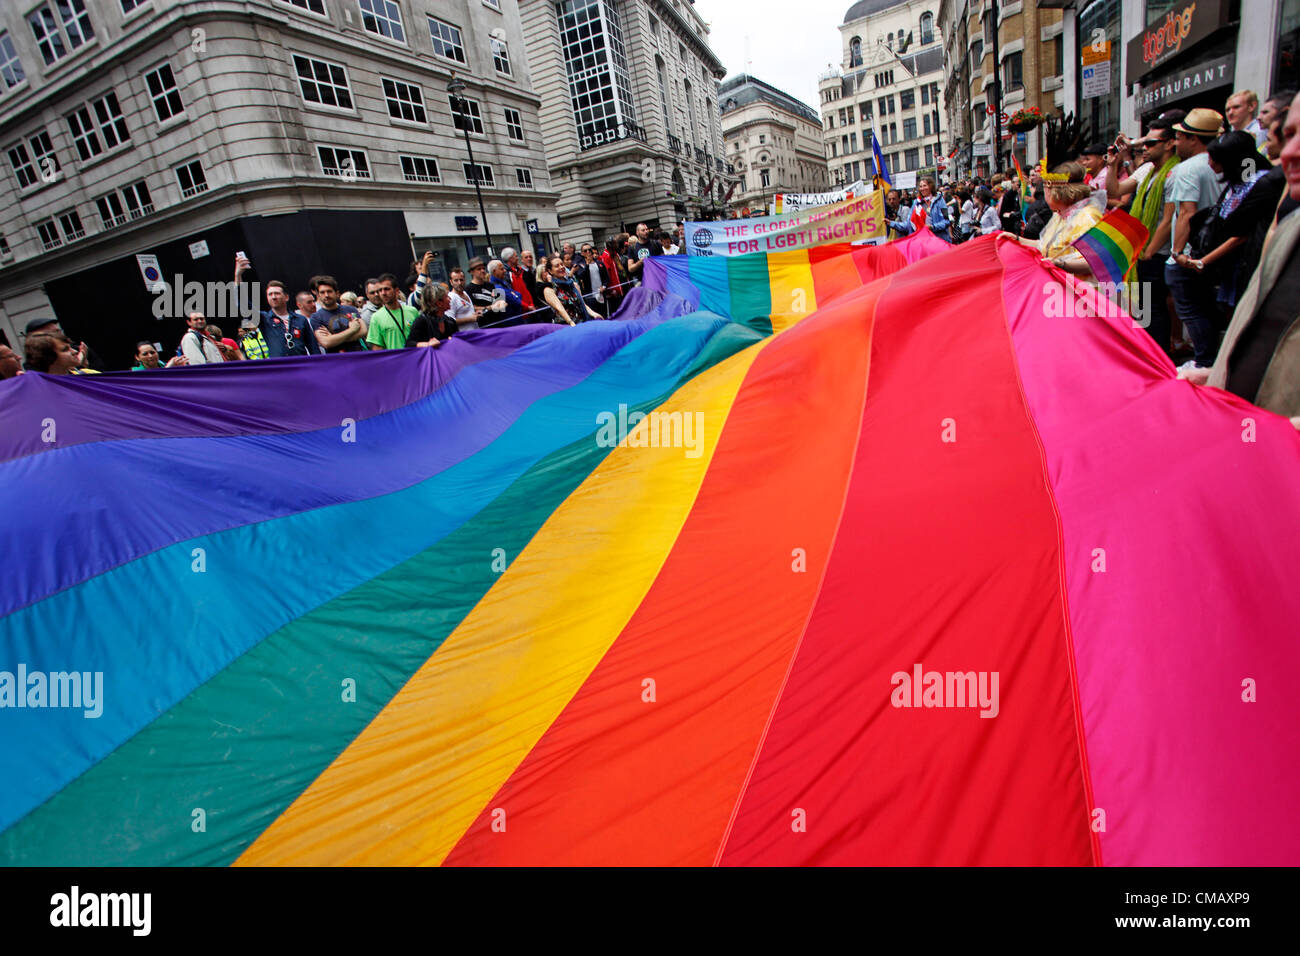 London, UK. 7th July 2012. The rainbow flag and participants marching in World Pride 2012, London, England Stock Photo